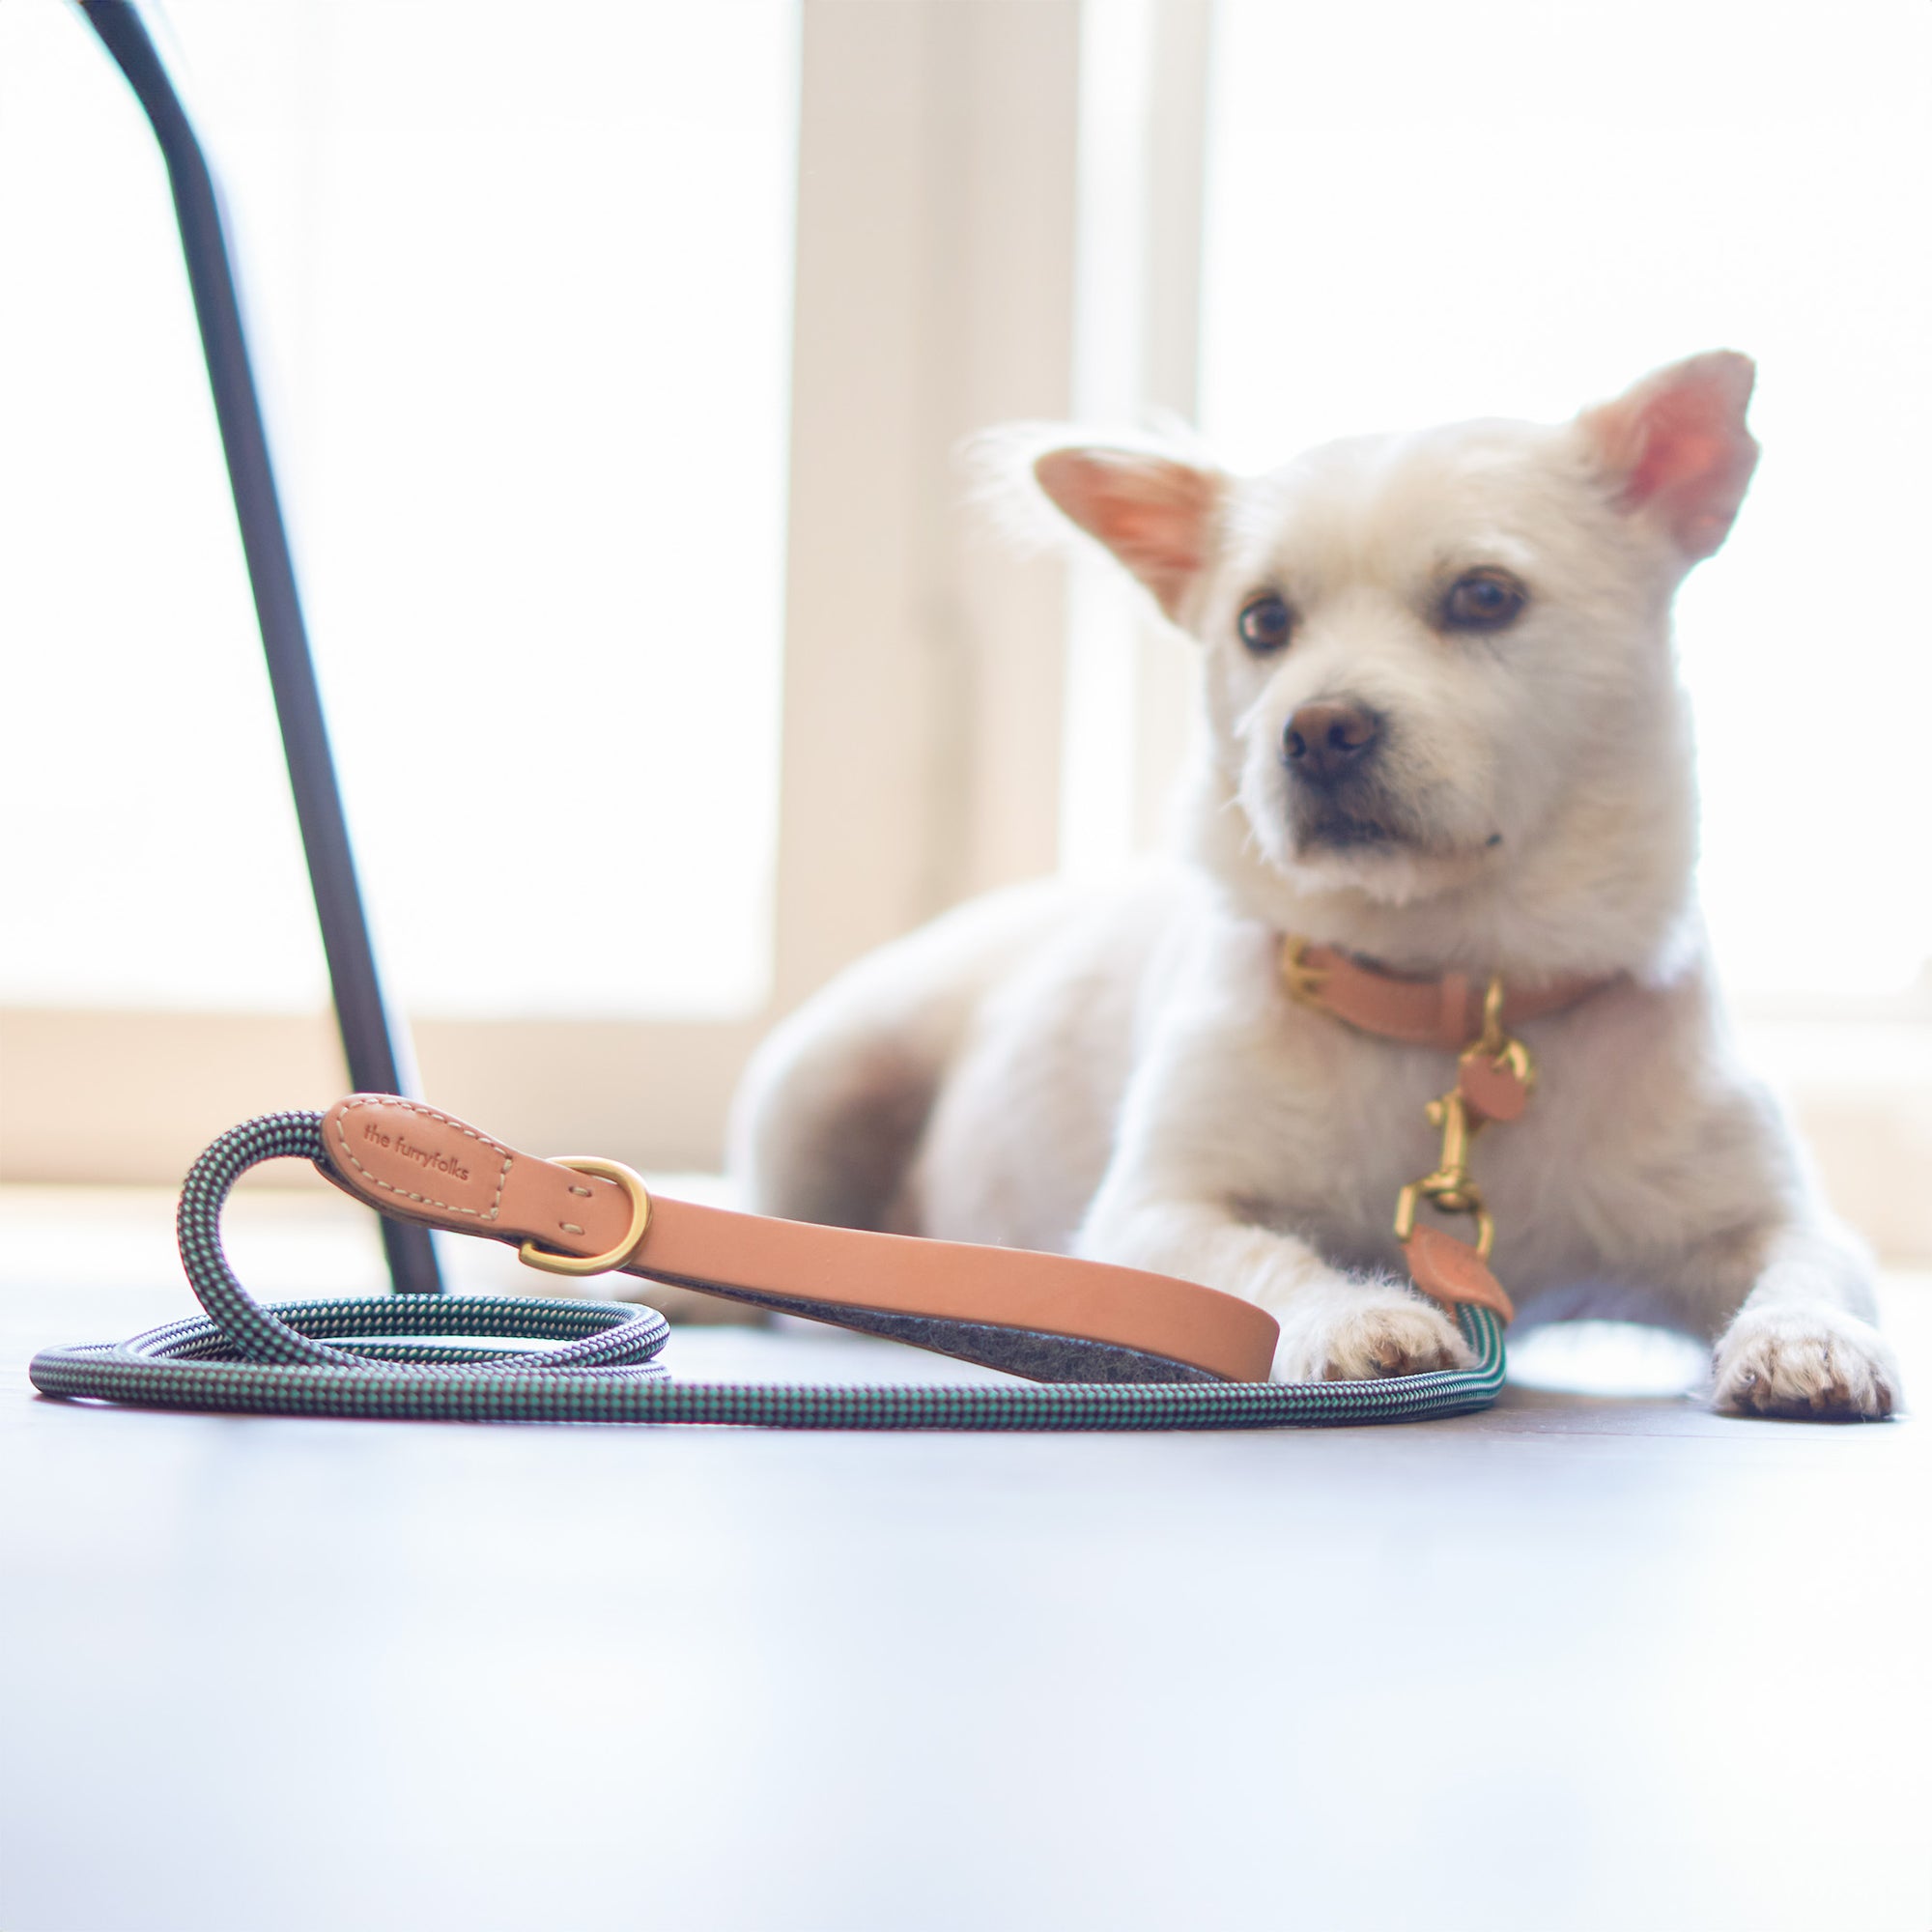 The image shows a small, white dog sitting on the floor next to a teal and black woven leash with tan leather accents and gold-tone hardware, which likely belongs to "The Furryfolks" brand. The leash and collar set appears to be of high quality, and the dog is wearing a matching collar. The soft, natural light from the window creates a warm, inviting atmosphere.